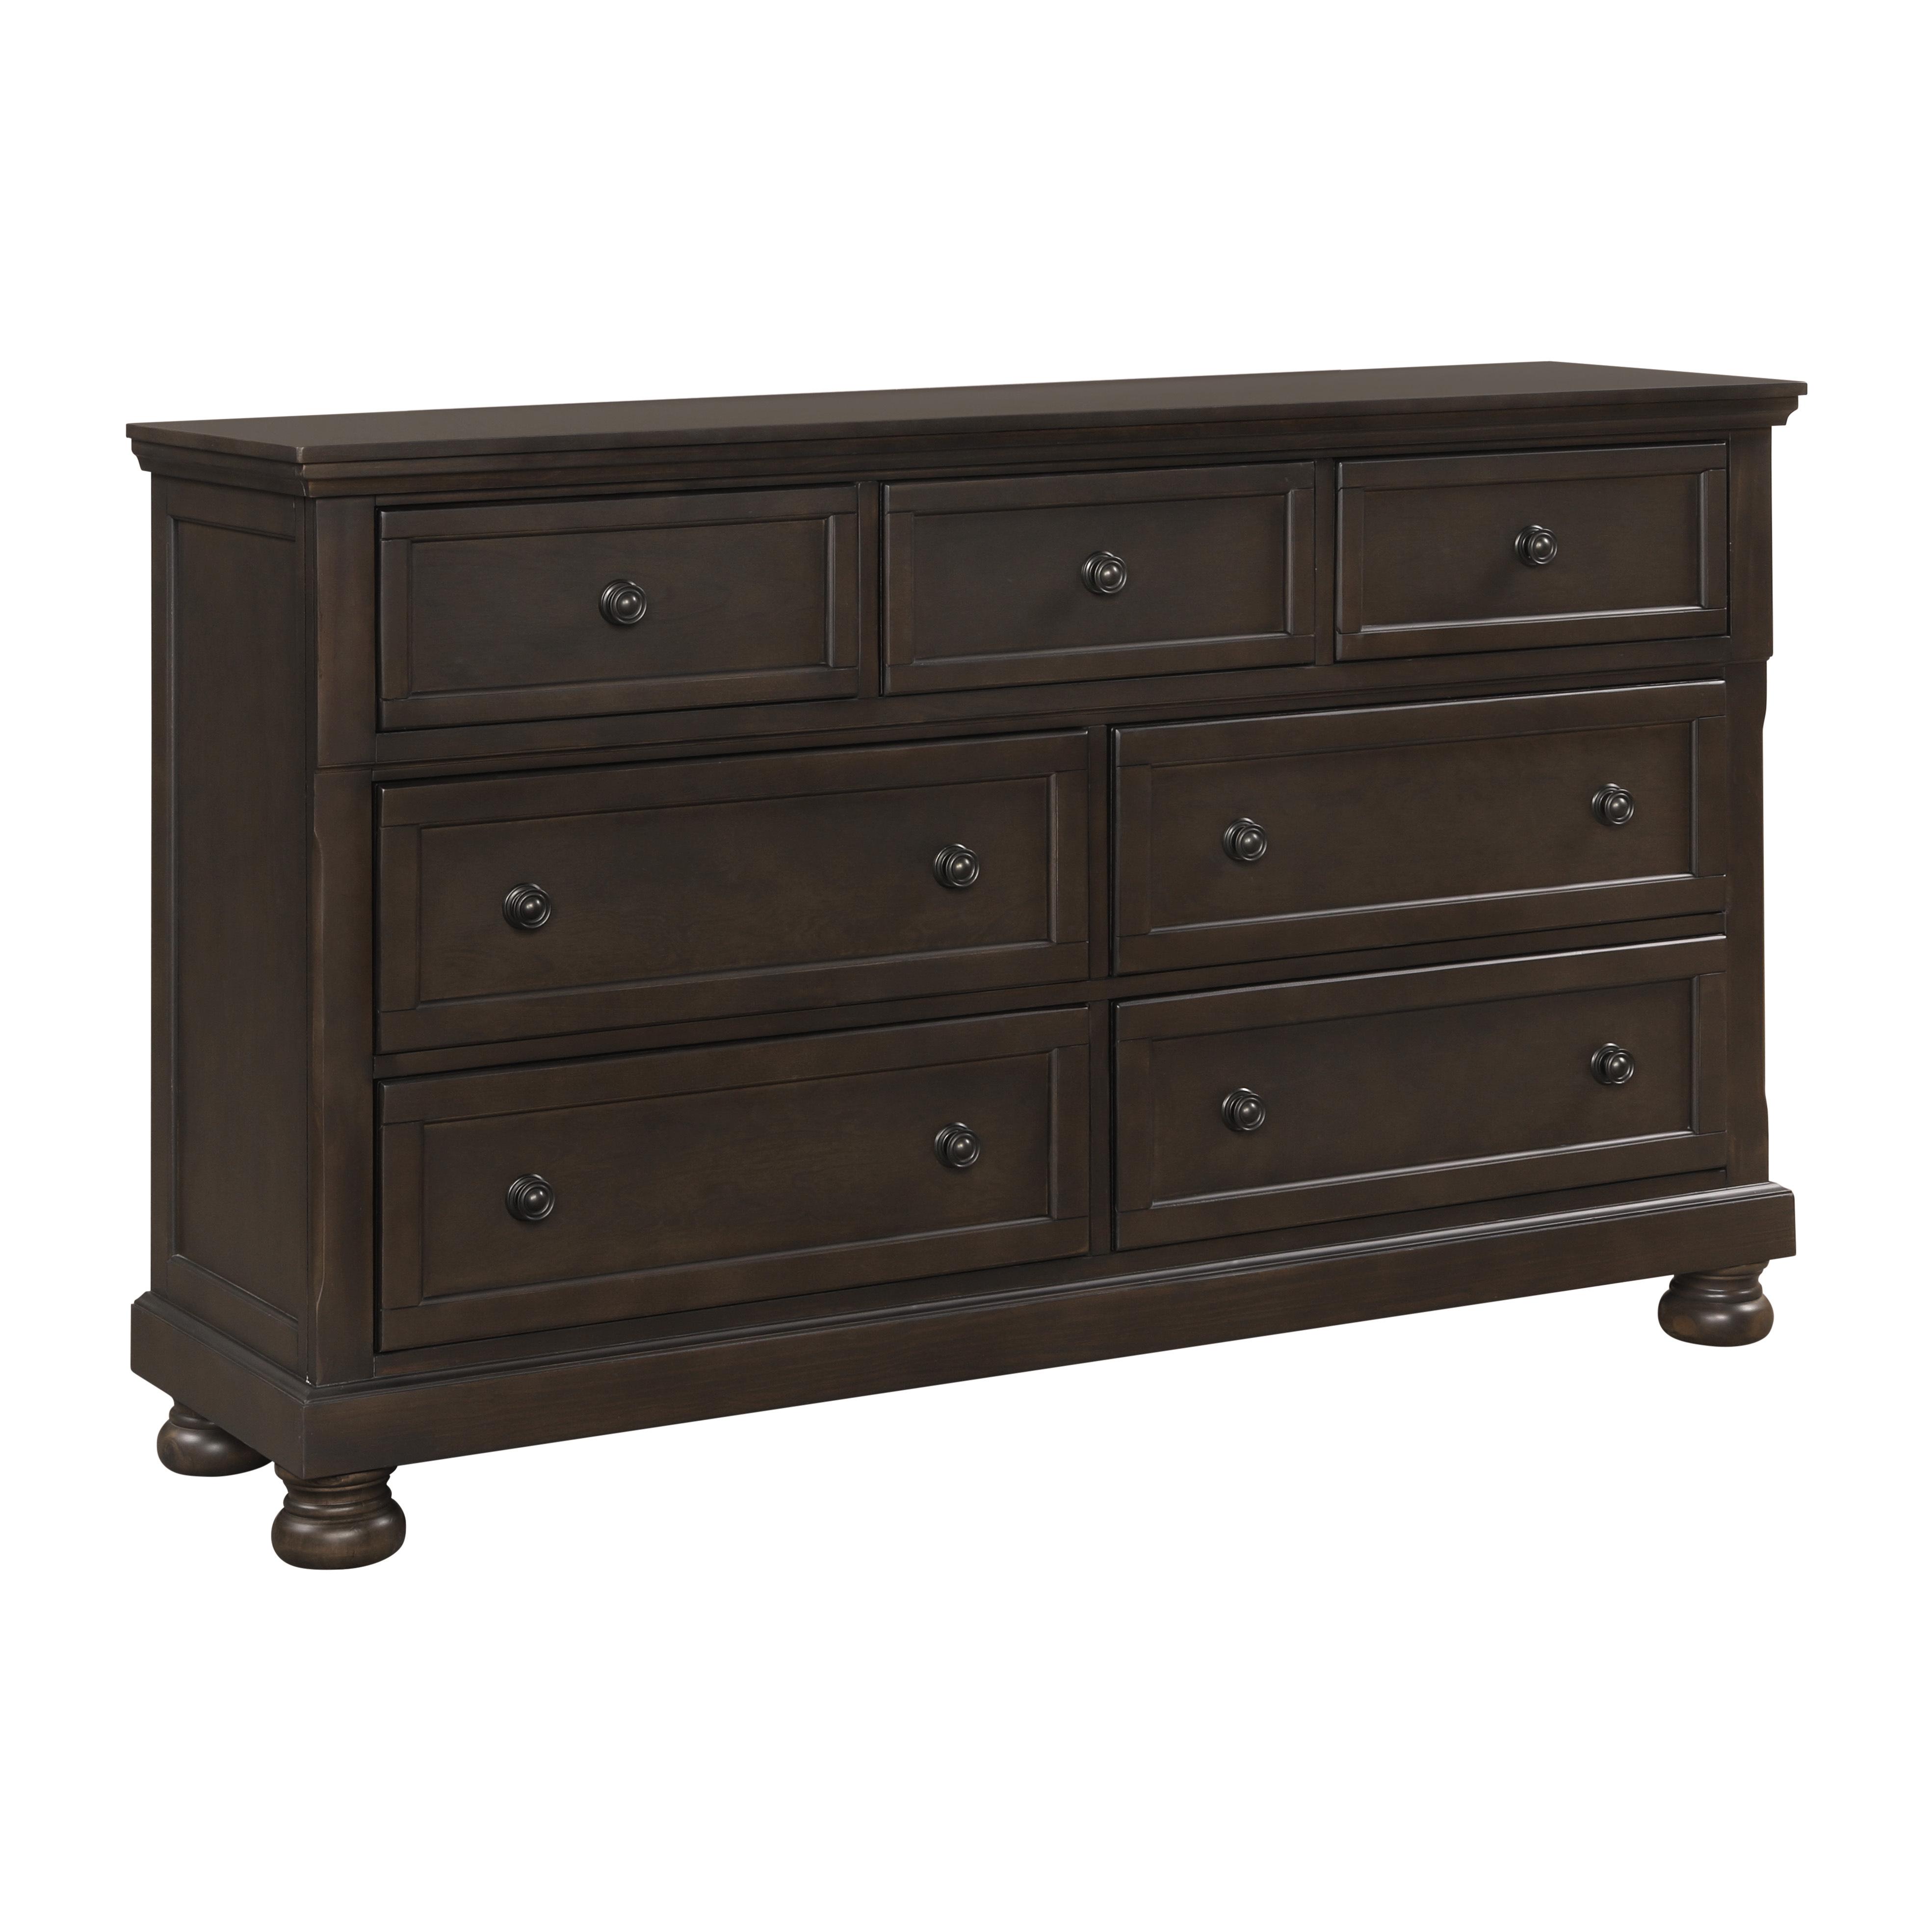 Transitional Dresser 1718GY-5 Begonia 1718GY-5 in Grayish Brown 